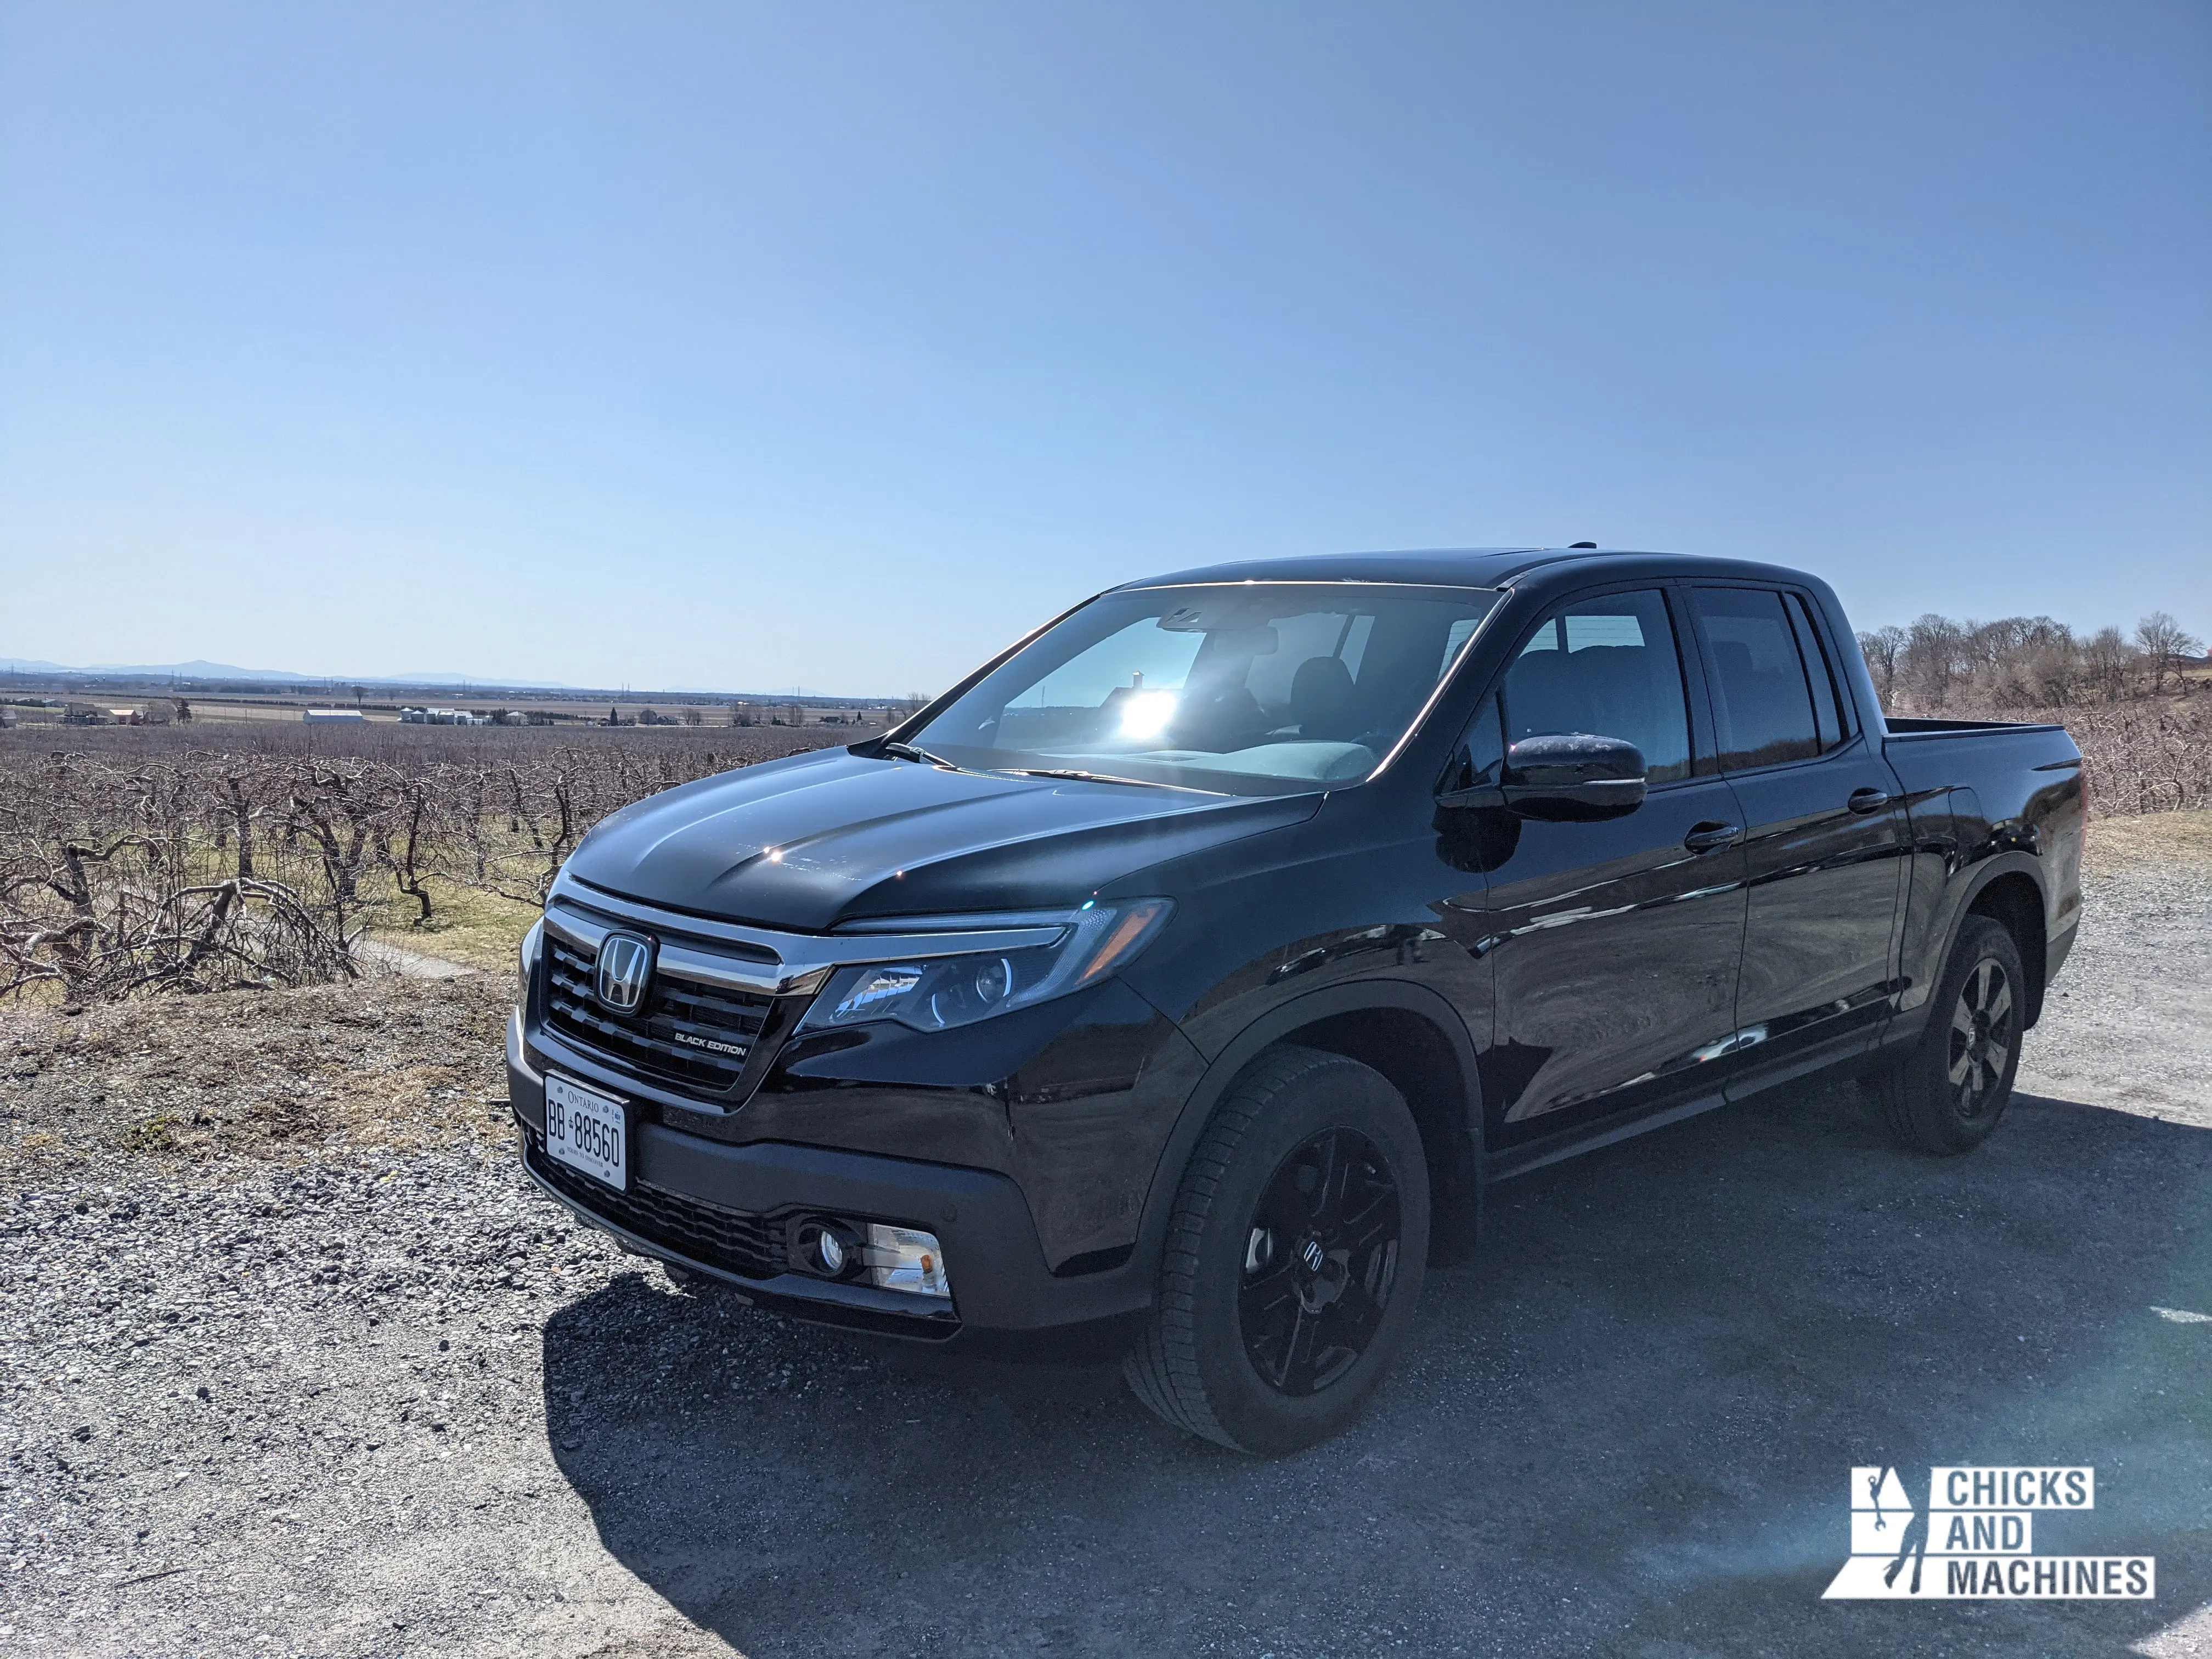 The 2020 Honda Ridgeline Black Edition in the orchards